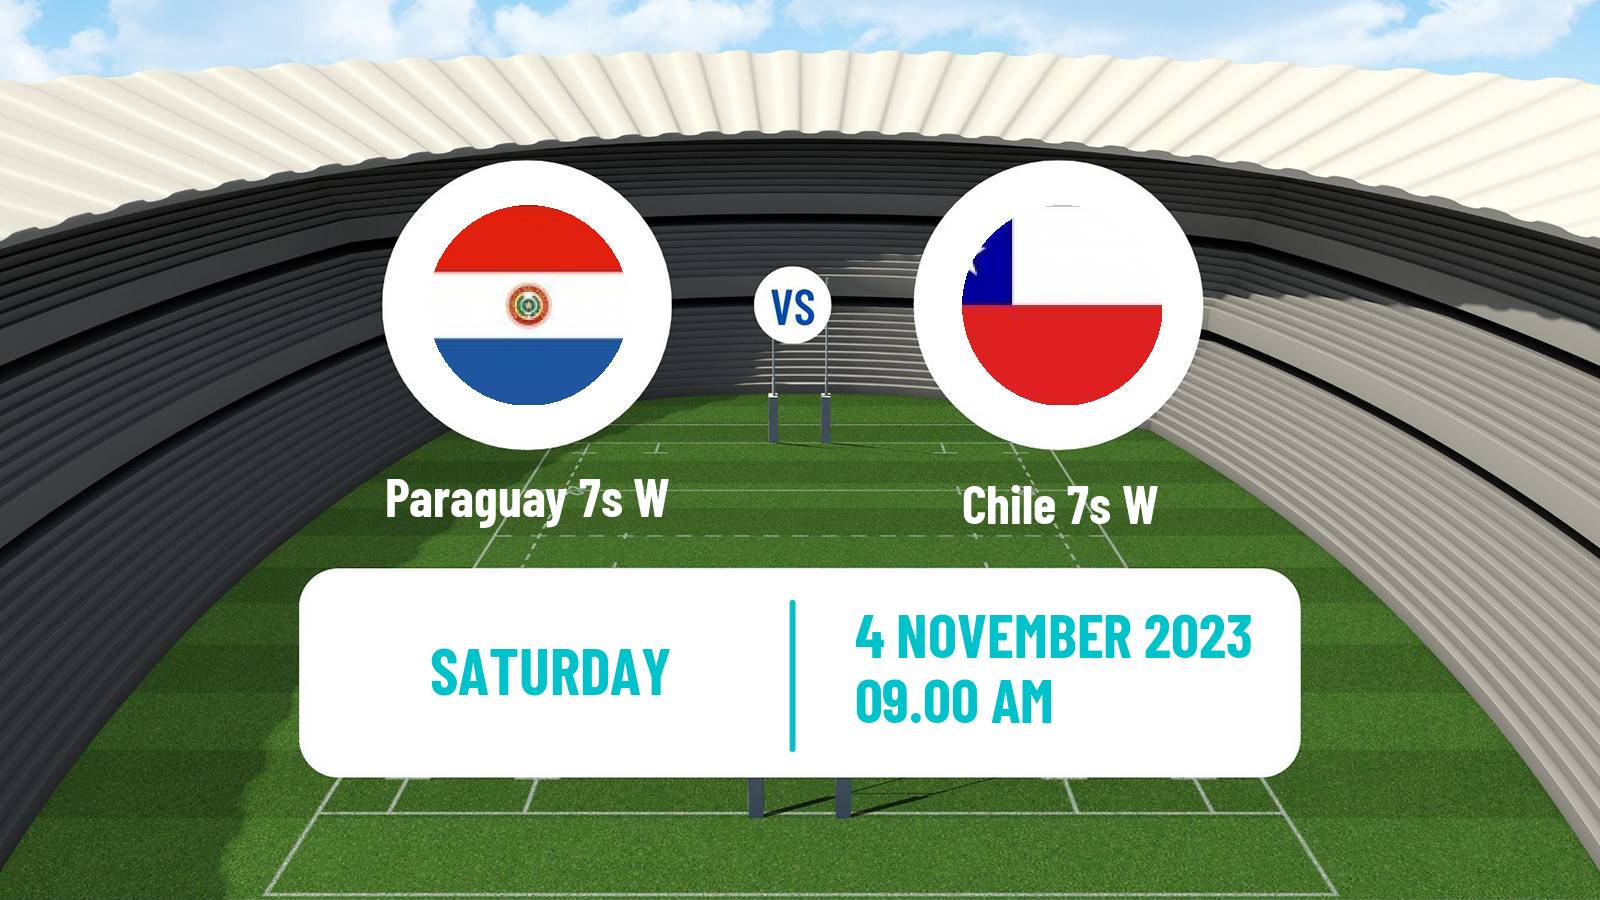 Rugby union Pan American 7s Rugby Women Paraguay 7s W - Chile 7s W